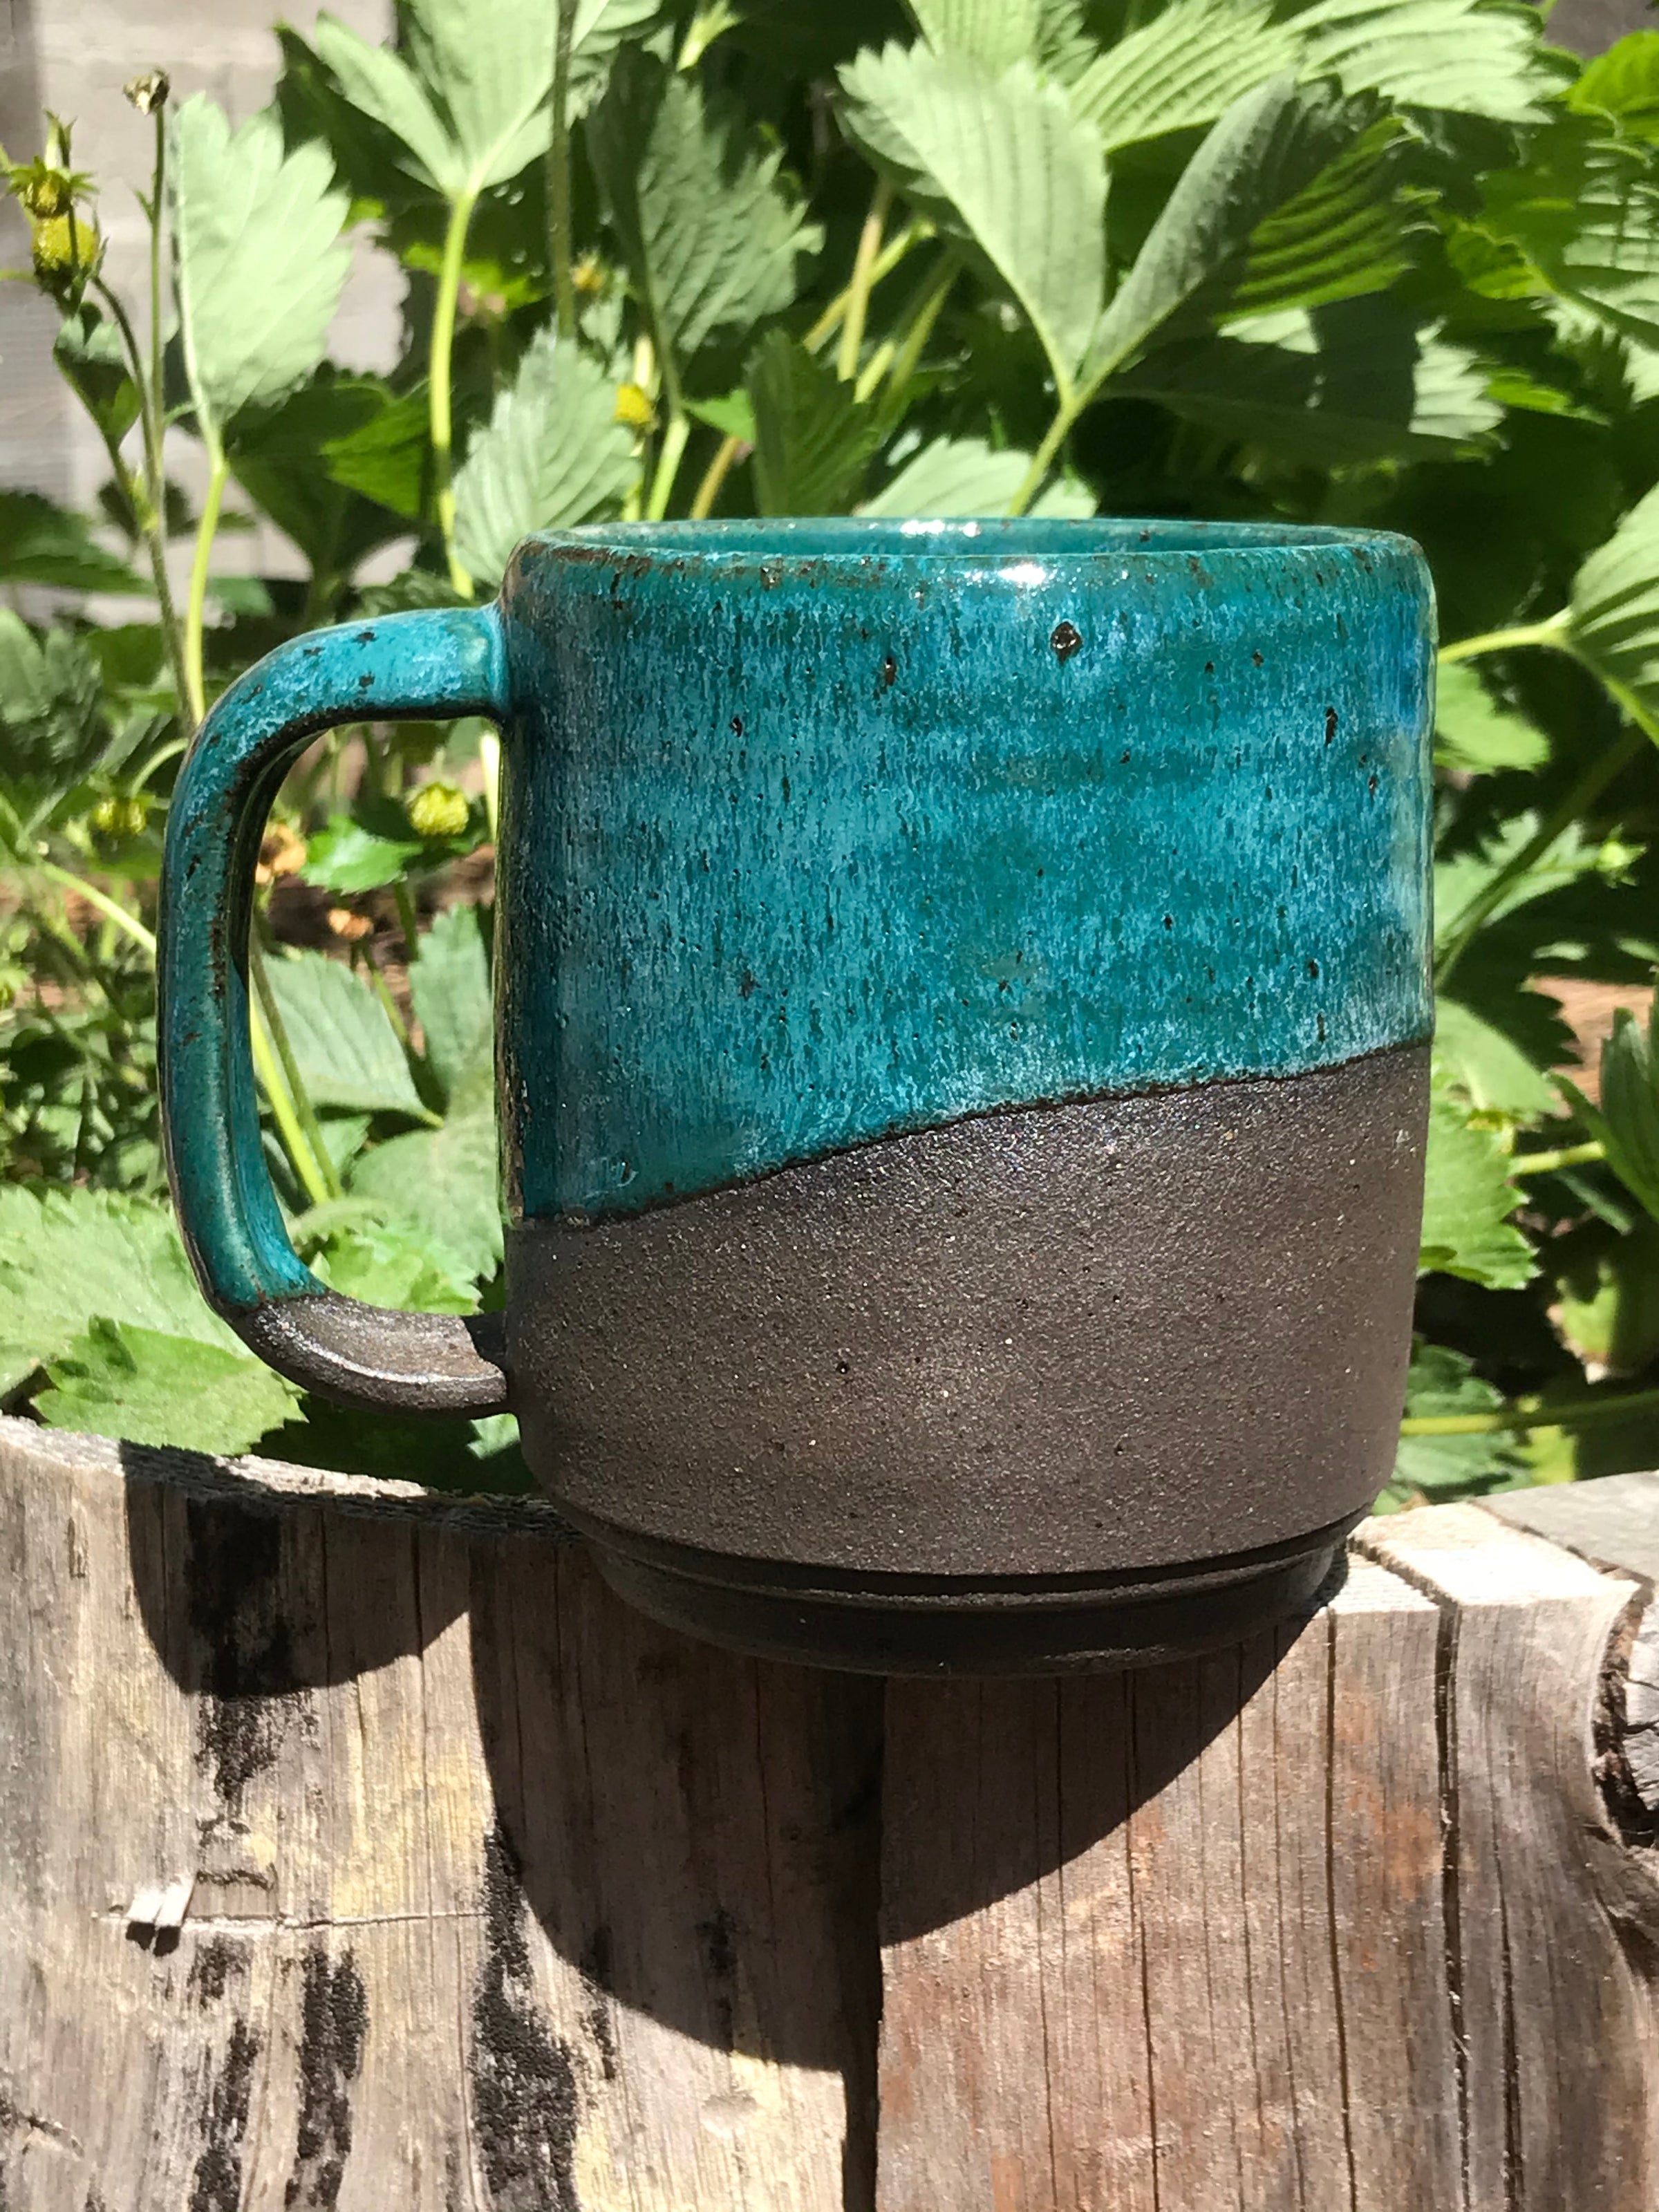 The Clay Lady's Blue Green Low-Fire Glaze - Mid-South Ceramics